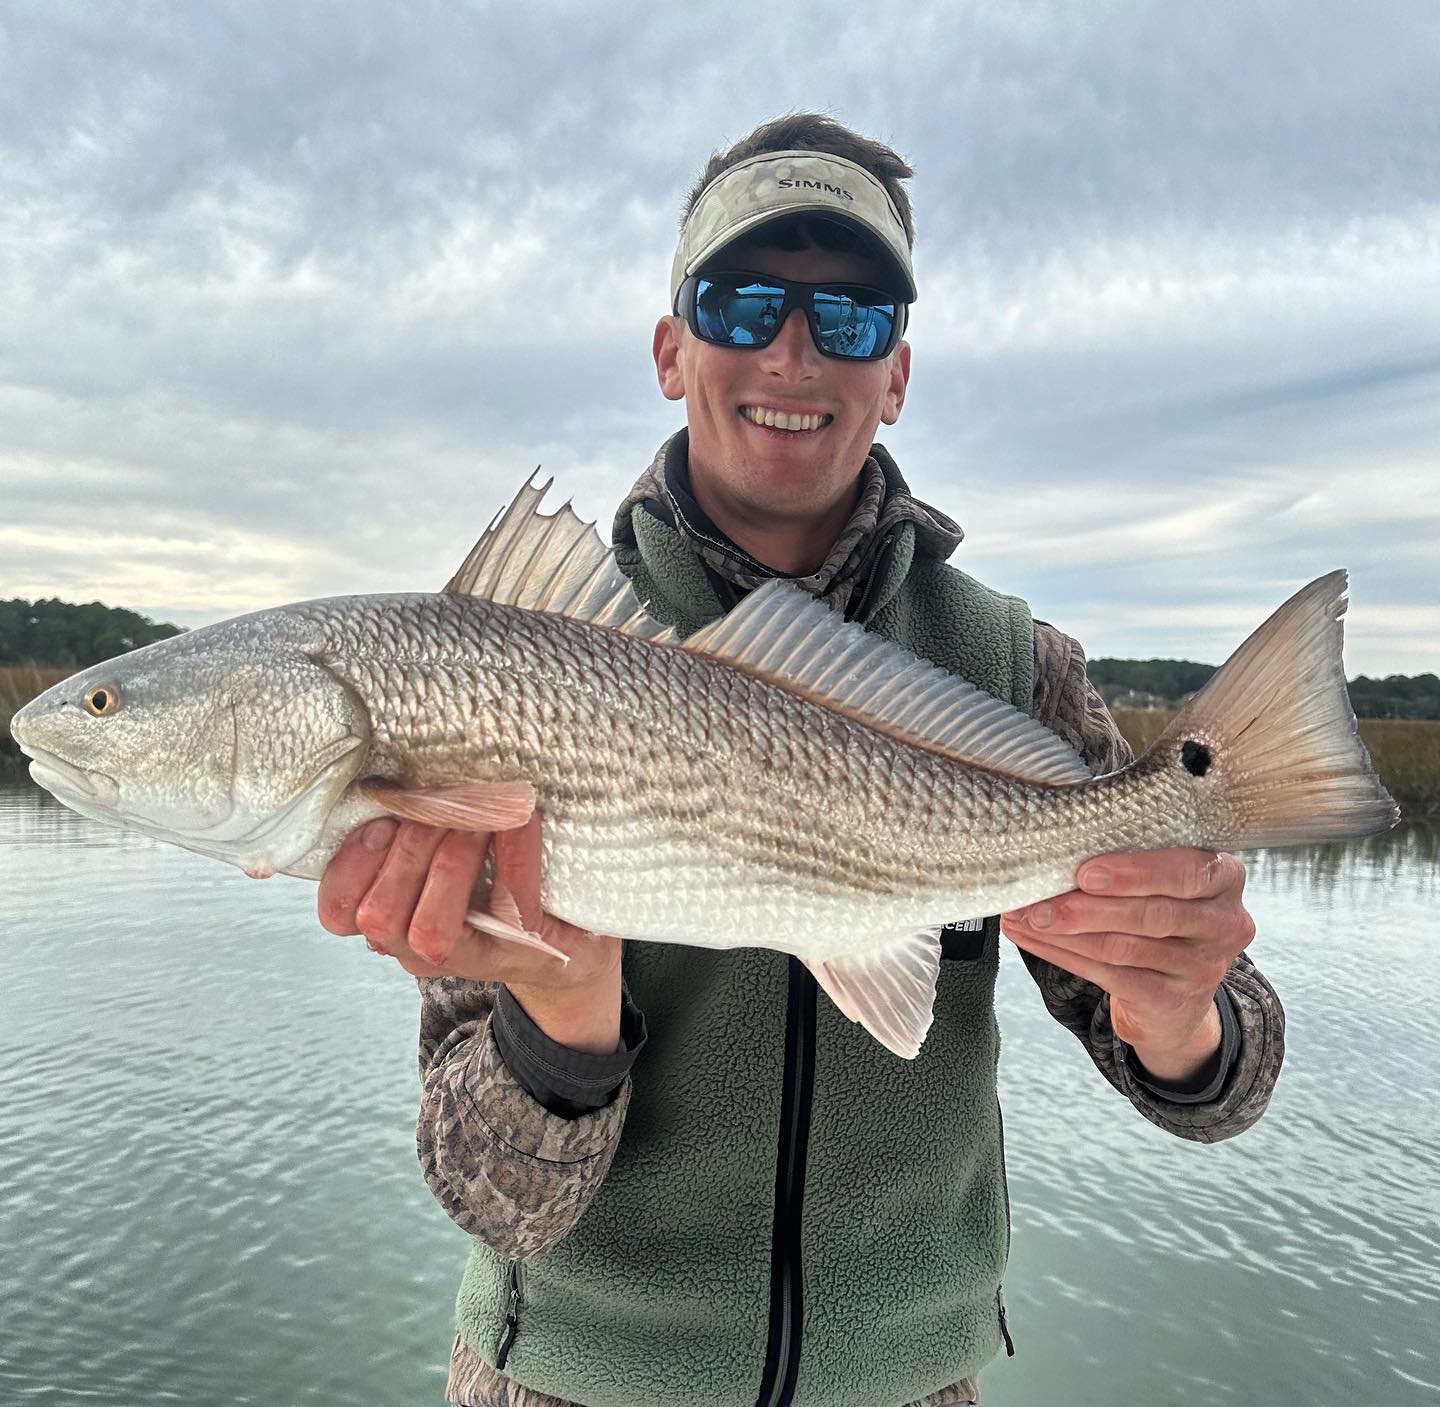 Things to do in Hilton Head - In Shore Fishing